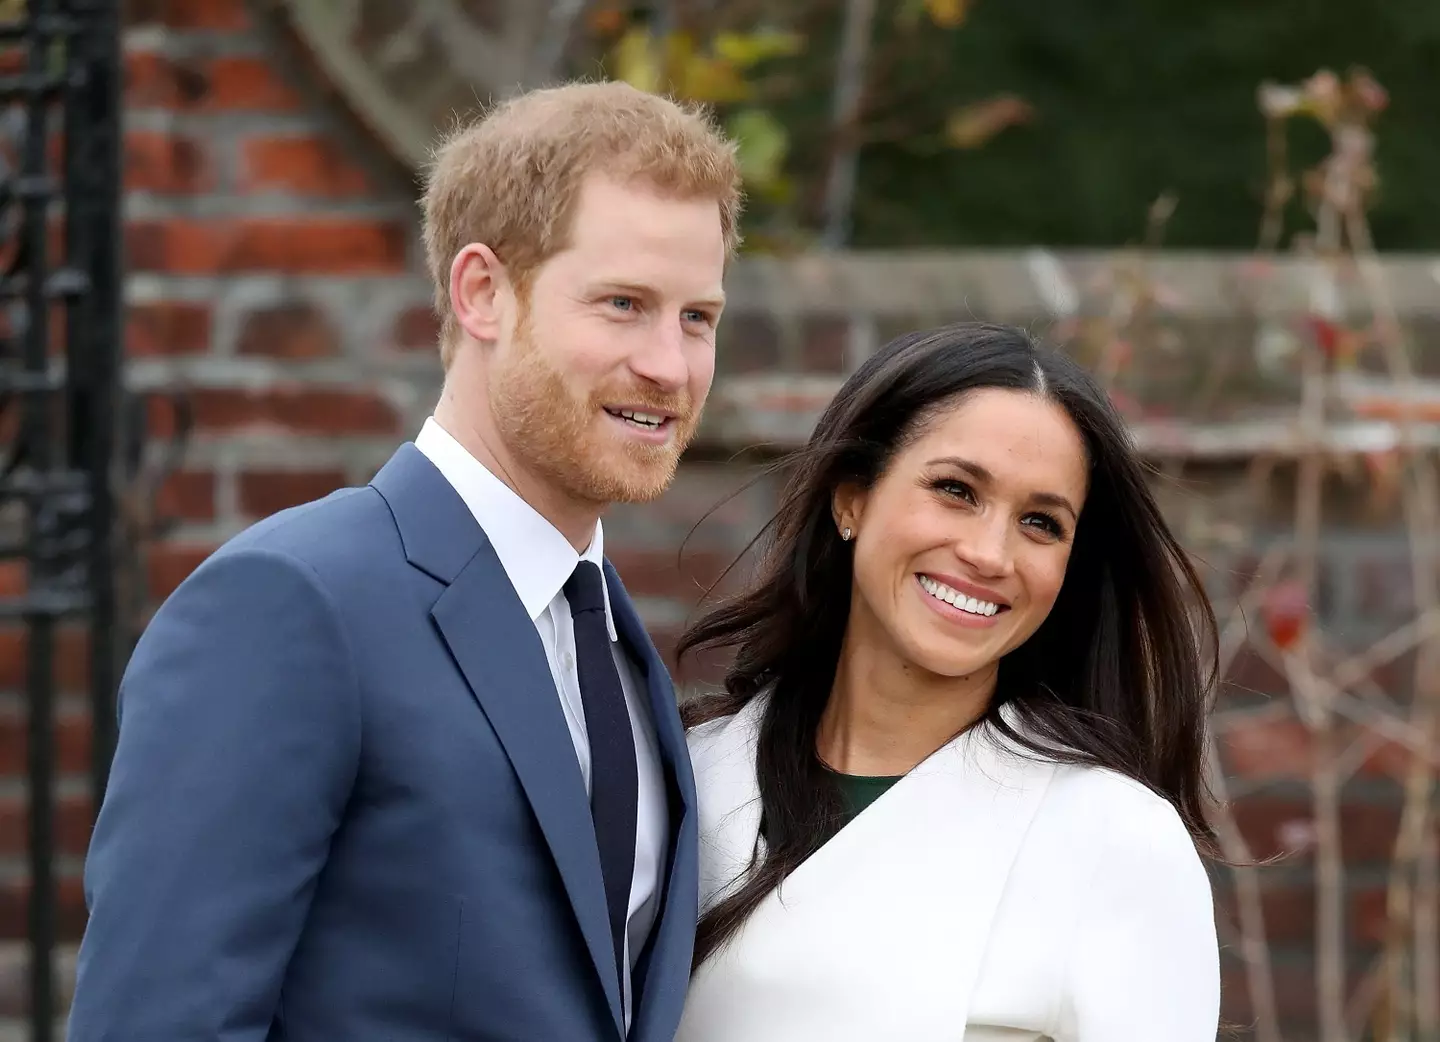 Harry and Meghan have been married since 2018.